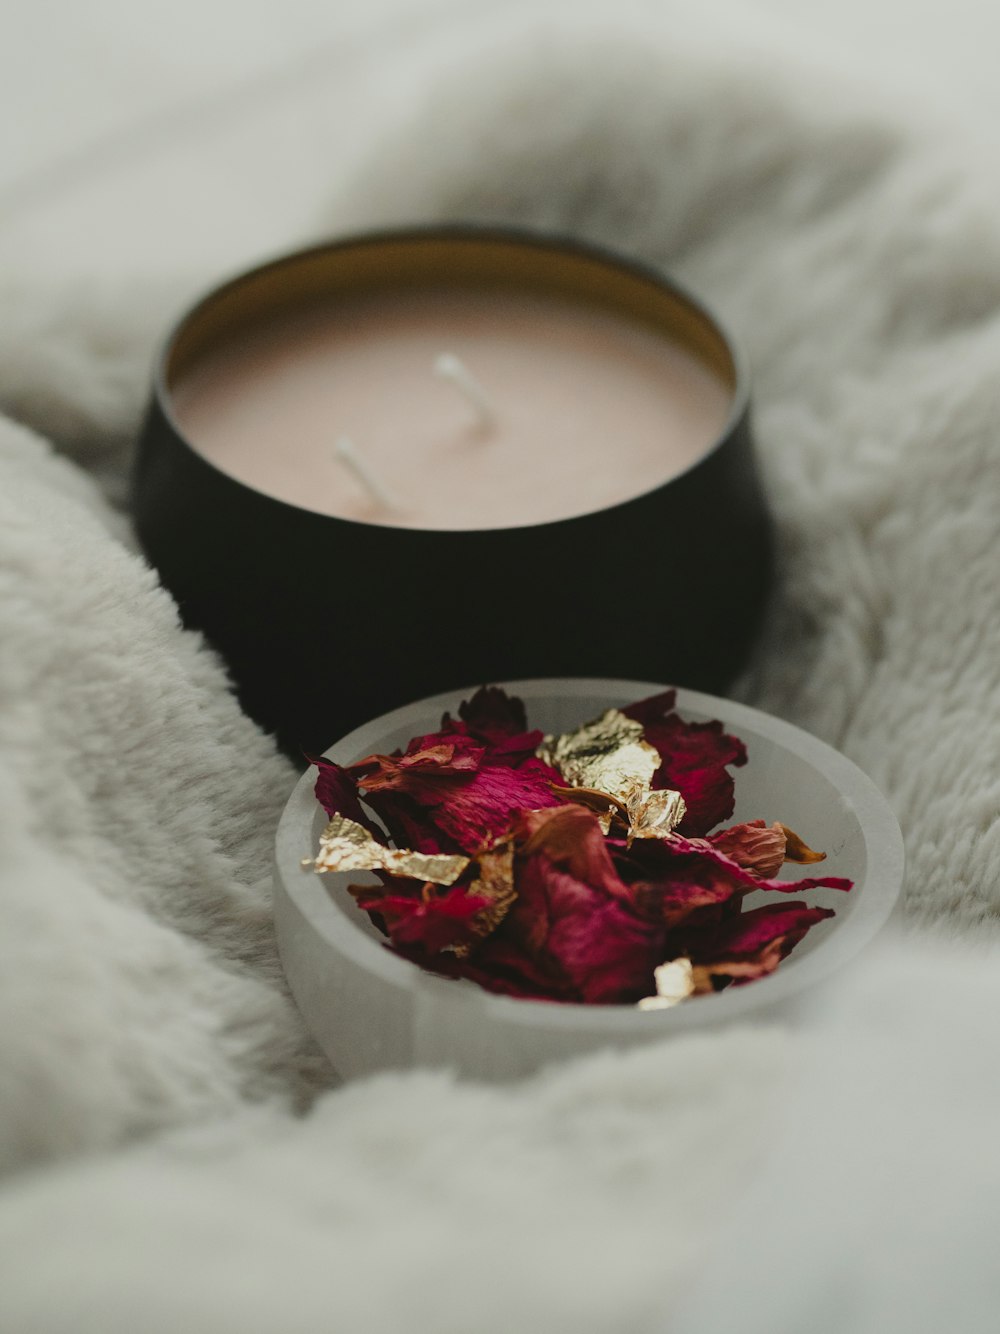 a bowl of rose petals next to a candle